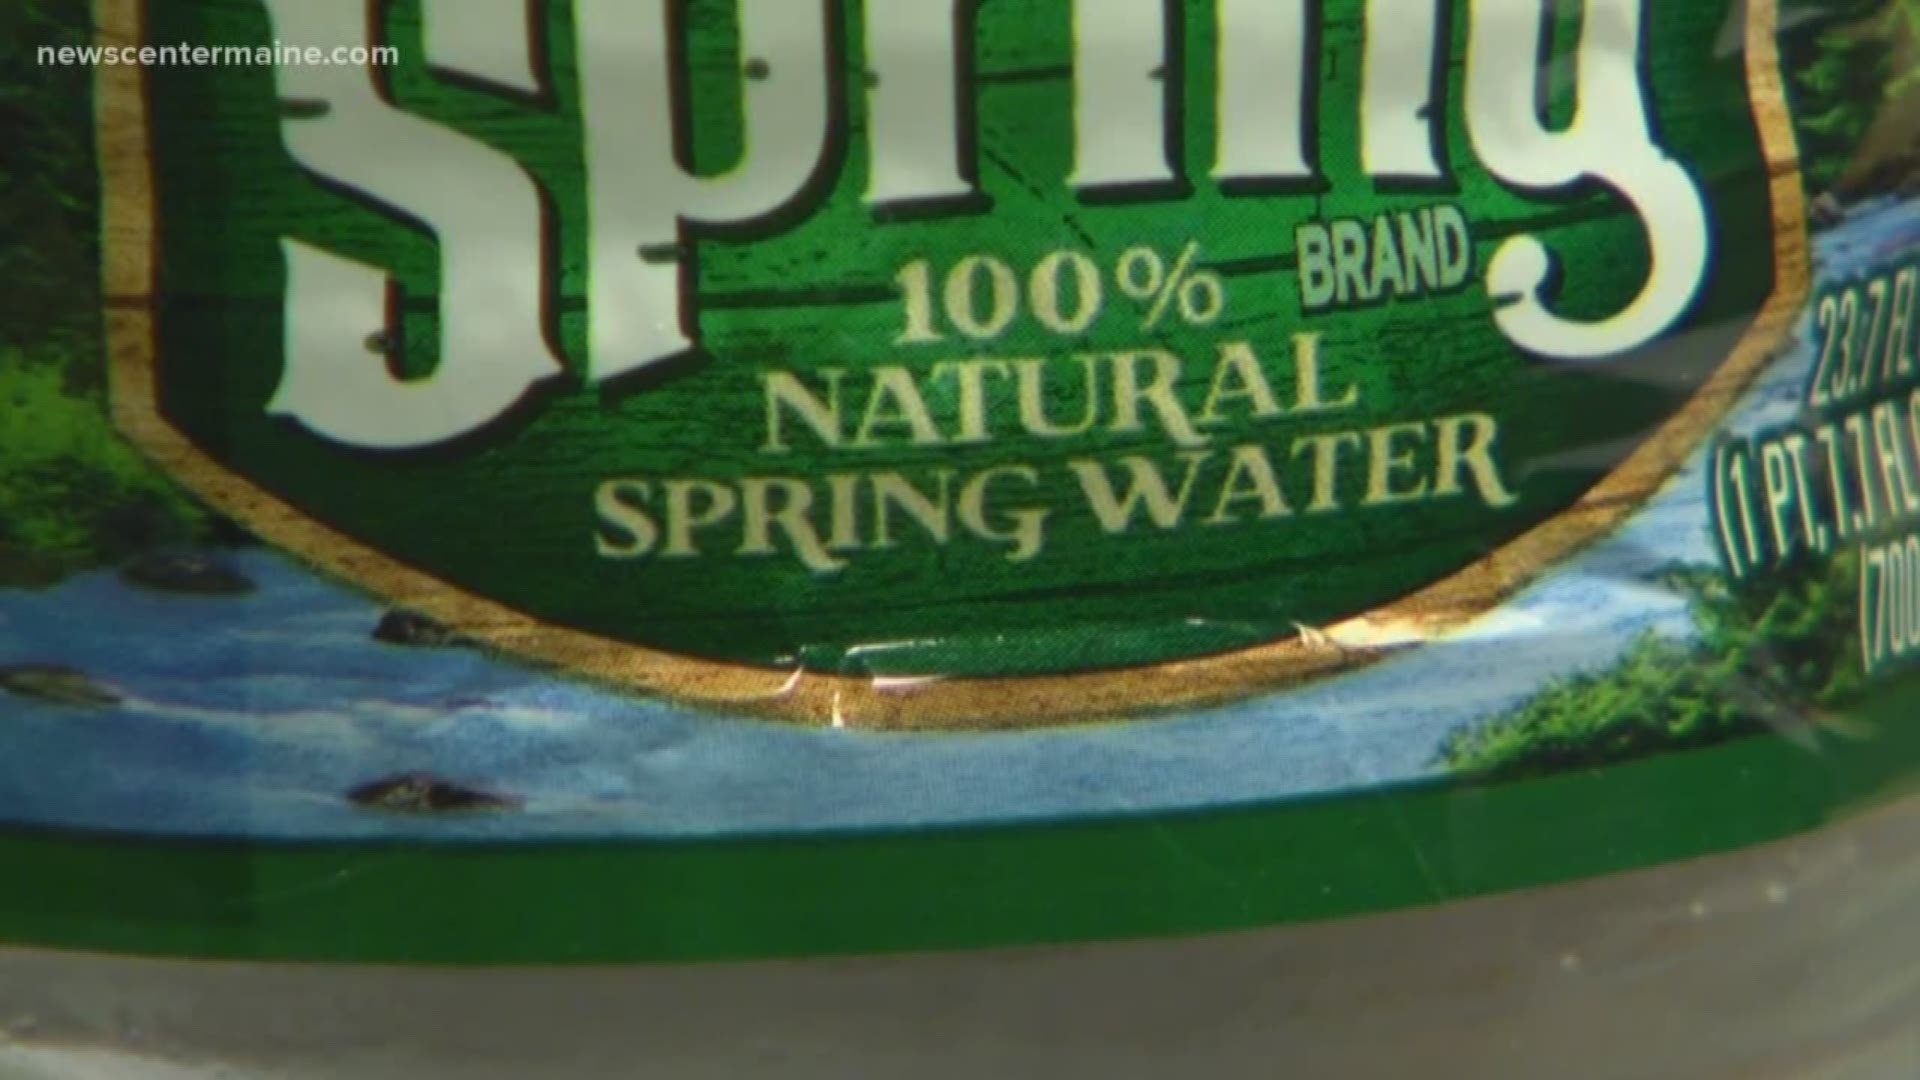 Poland Spring eyeing Rumford as location of its 4th Maine bottling plant